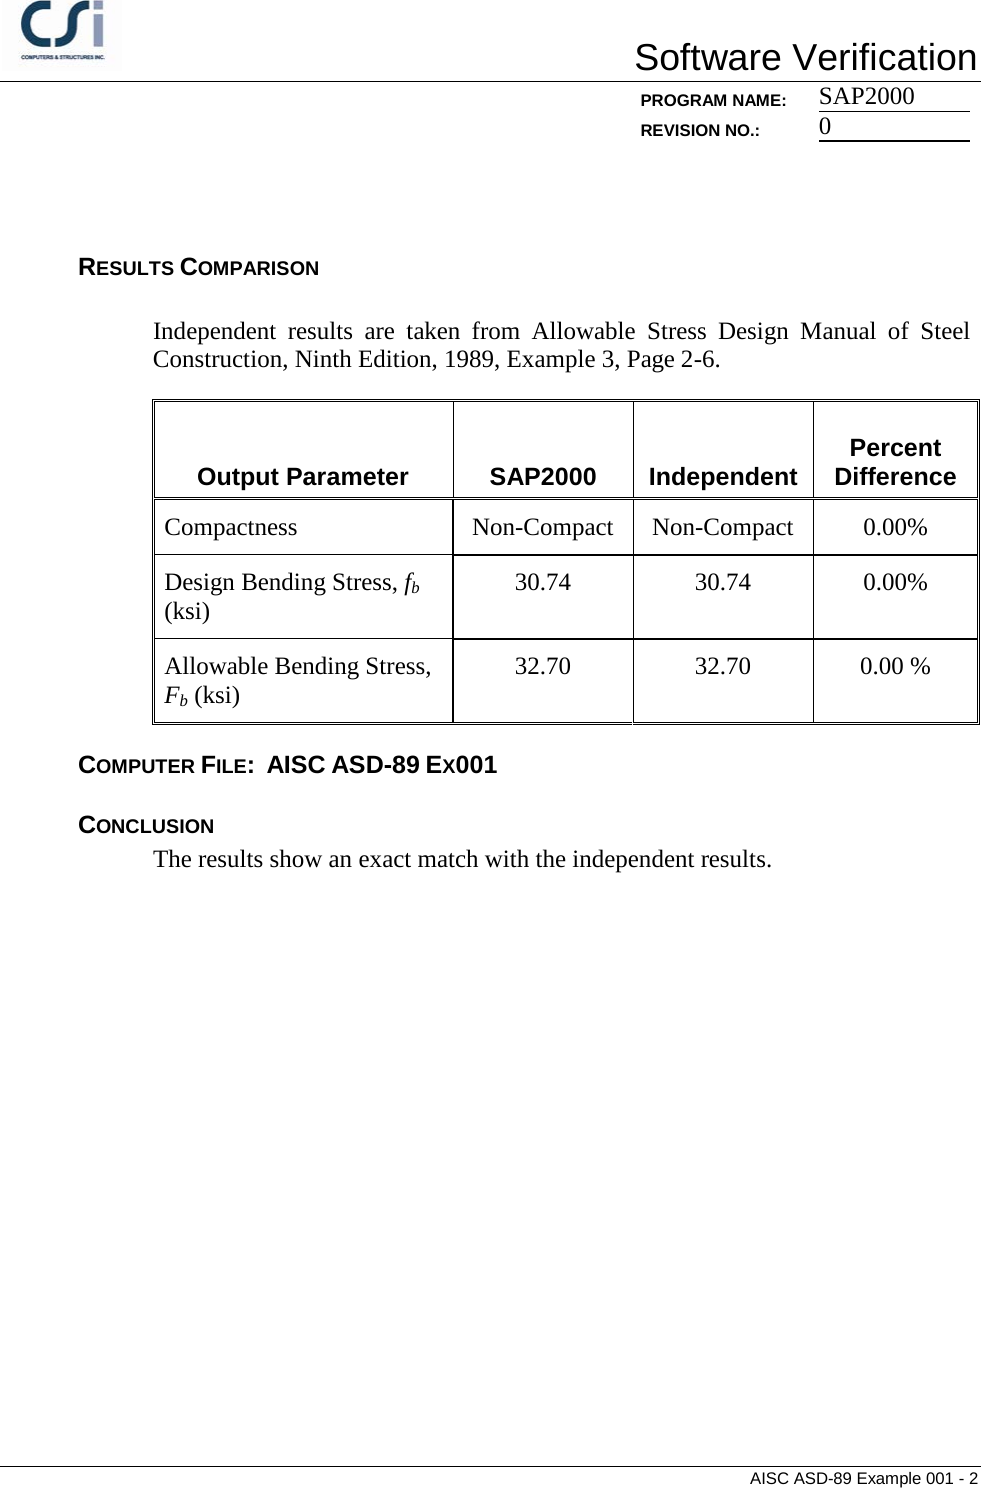 Page 2 of 5 - Contents AISC ASD-89 Example 001